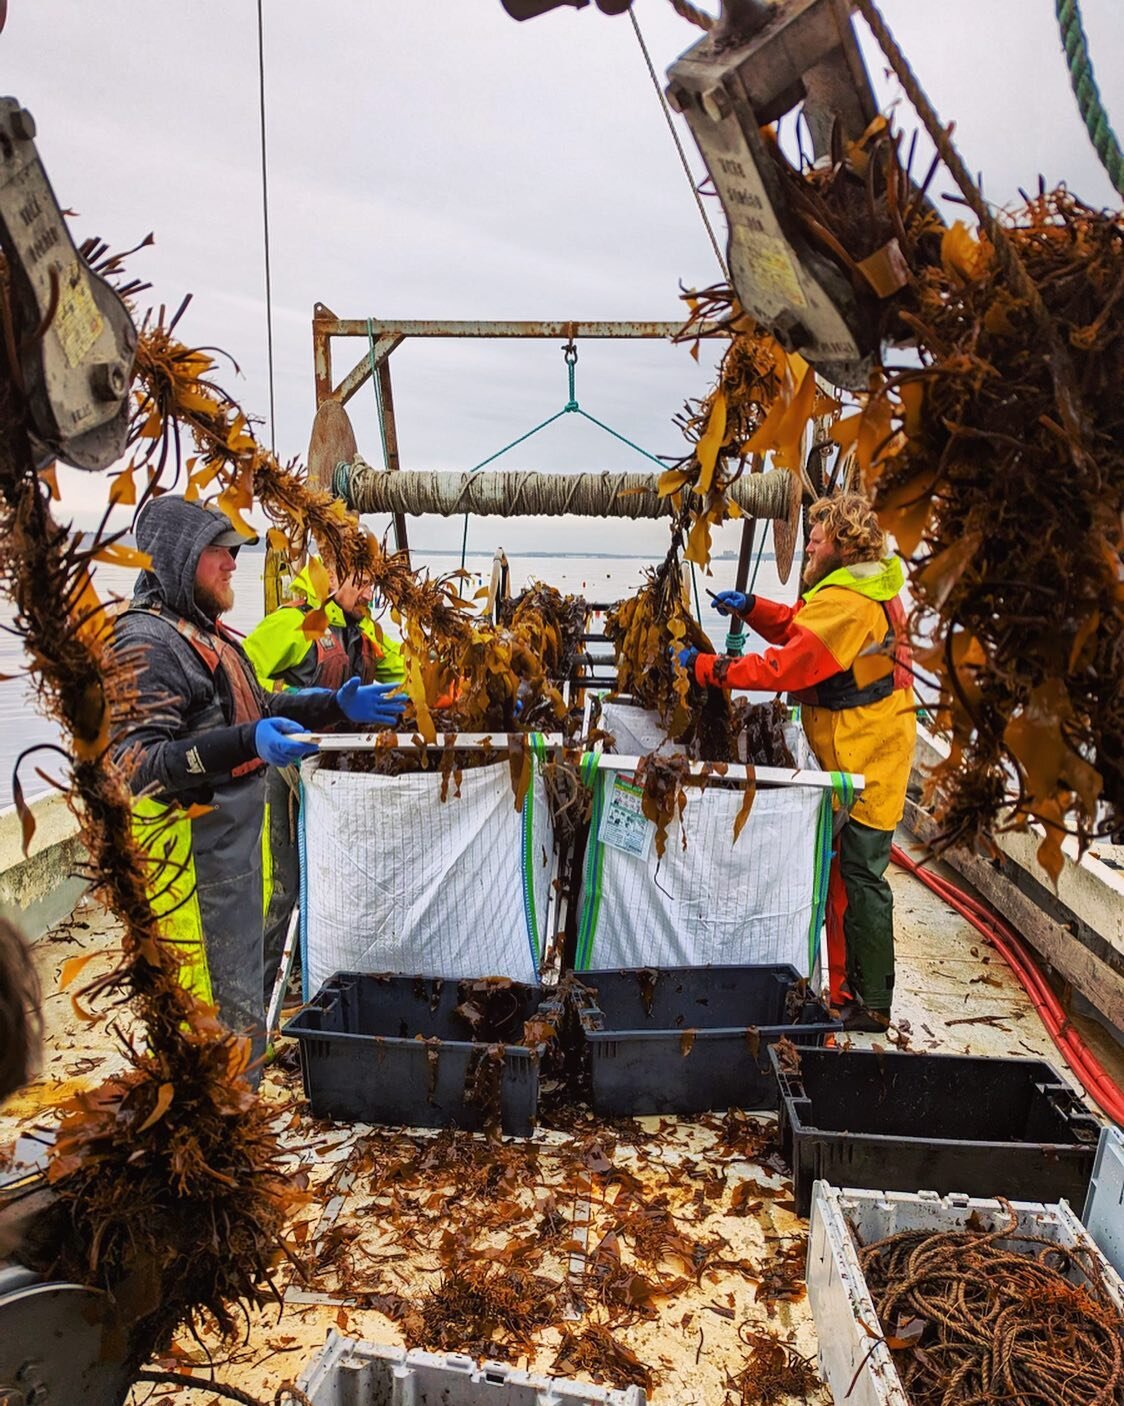 Maine&rsquo;s #kelpharvest is officially underway and we&rsquo;re up to our elbows in it! 🌿🌊 Each spring we get to see the fruits of our labor, after setting out lines of kelp in the fall and letting them grow all winter long, checking on progress 